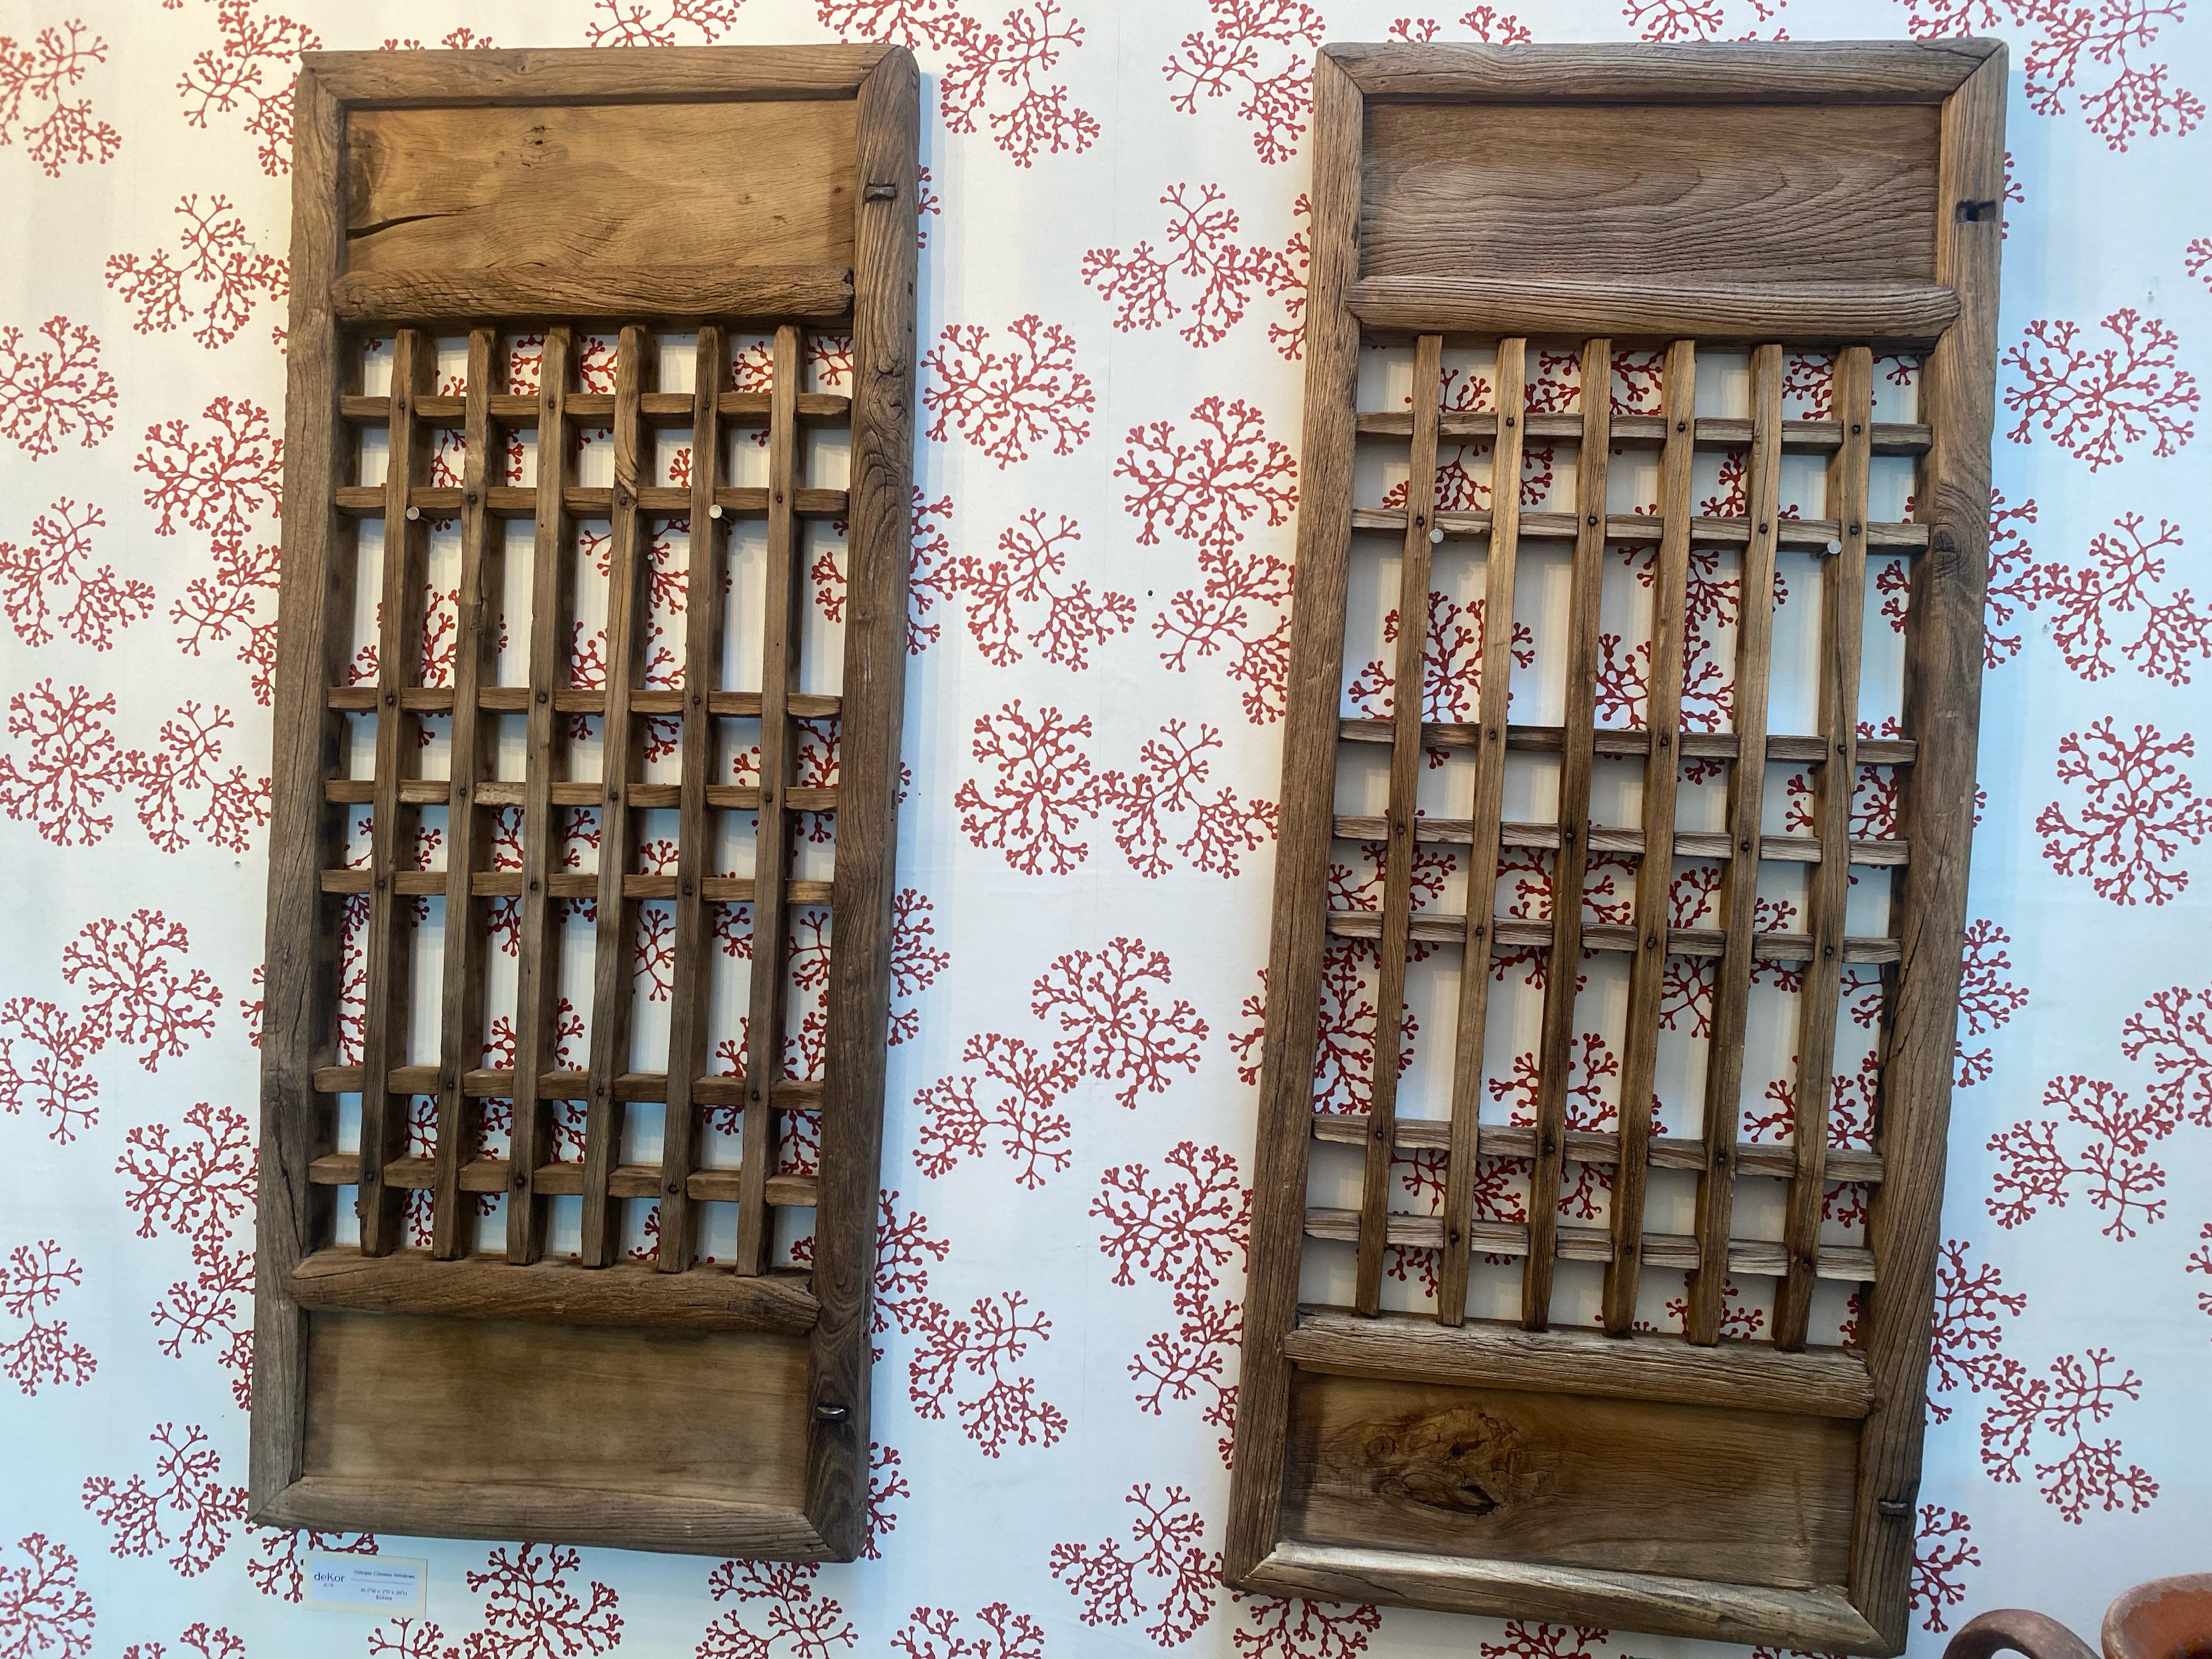 Rustic and absolutely stunning one-of-a-kind antiques. Chinese Wooden windows make for wonderful wall accents. 

Windows are sold together in a set of 2, we are unable to sell the pieces seperatly.